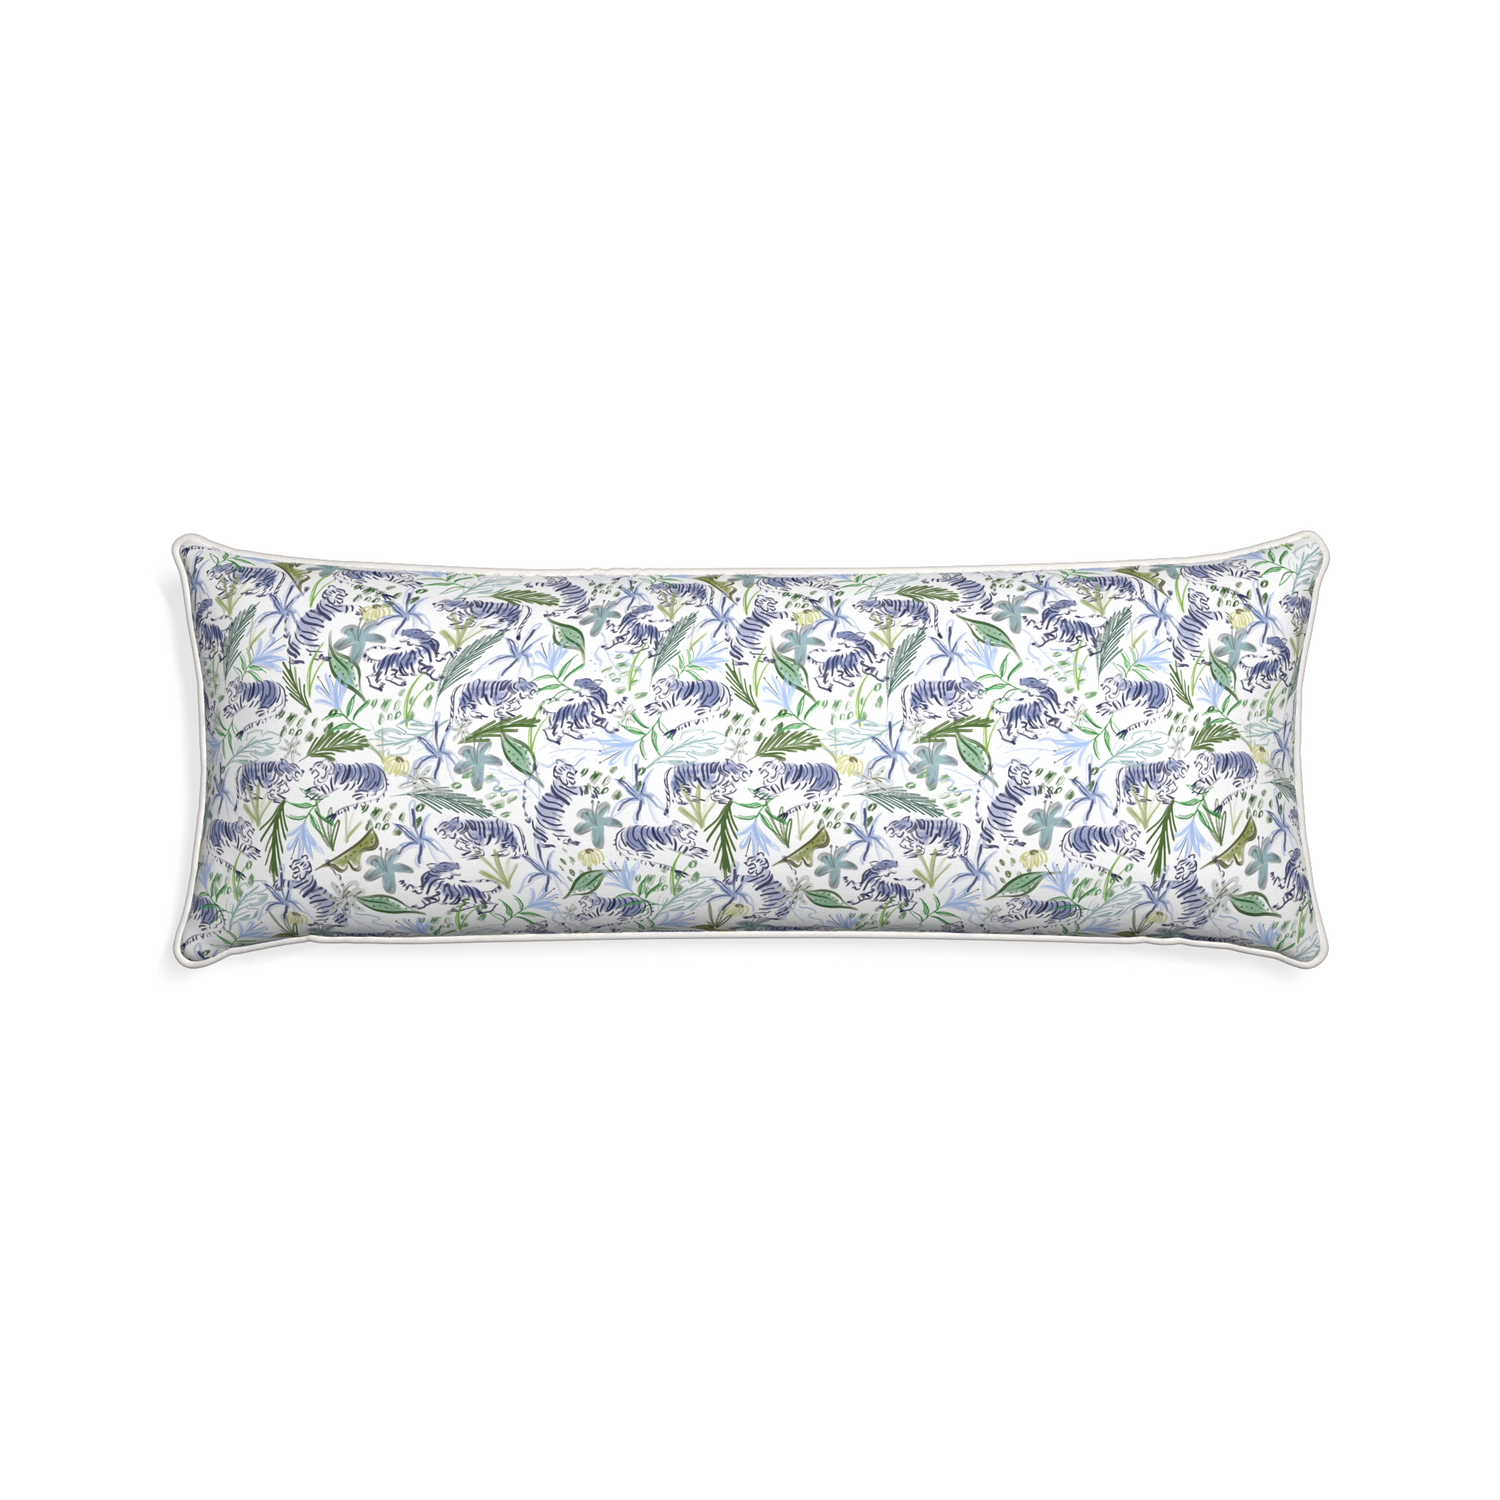 Xl-lumbar frida green custom green tigerpillow with snow piping on white background